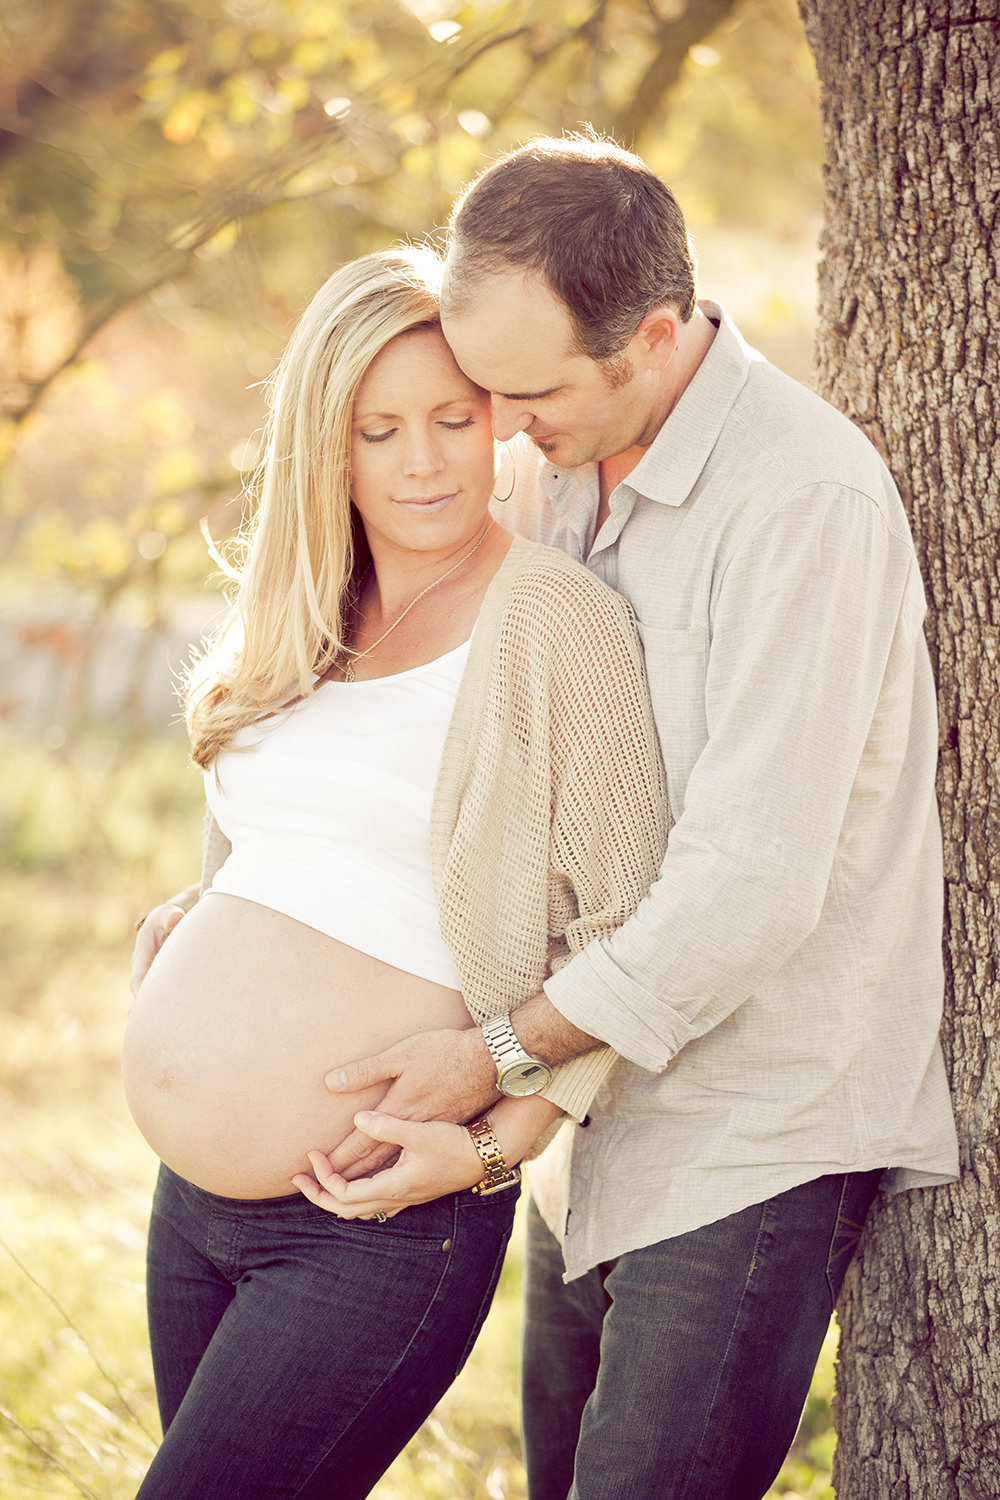 Vintage moment during Maternity Session in San Diego.